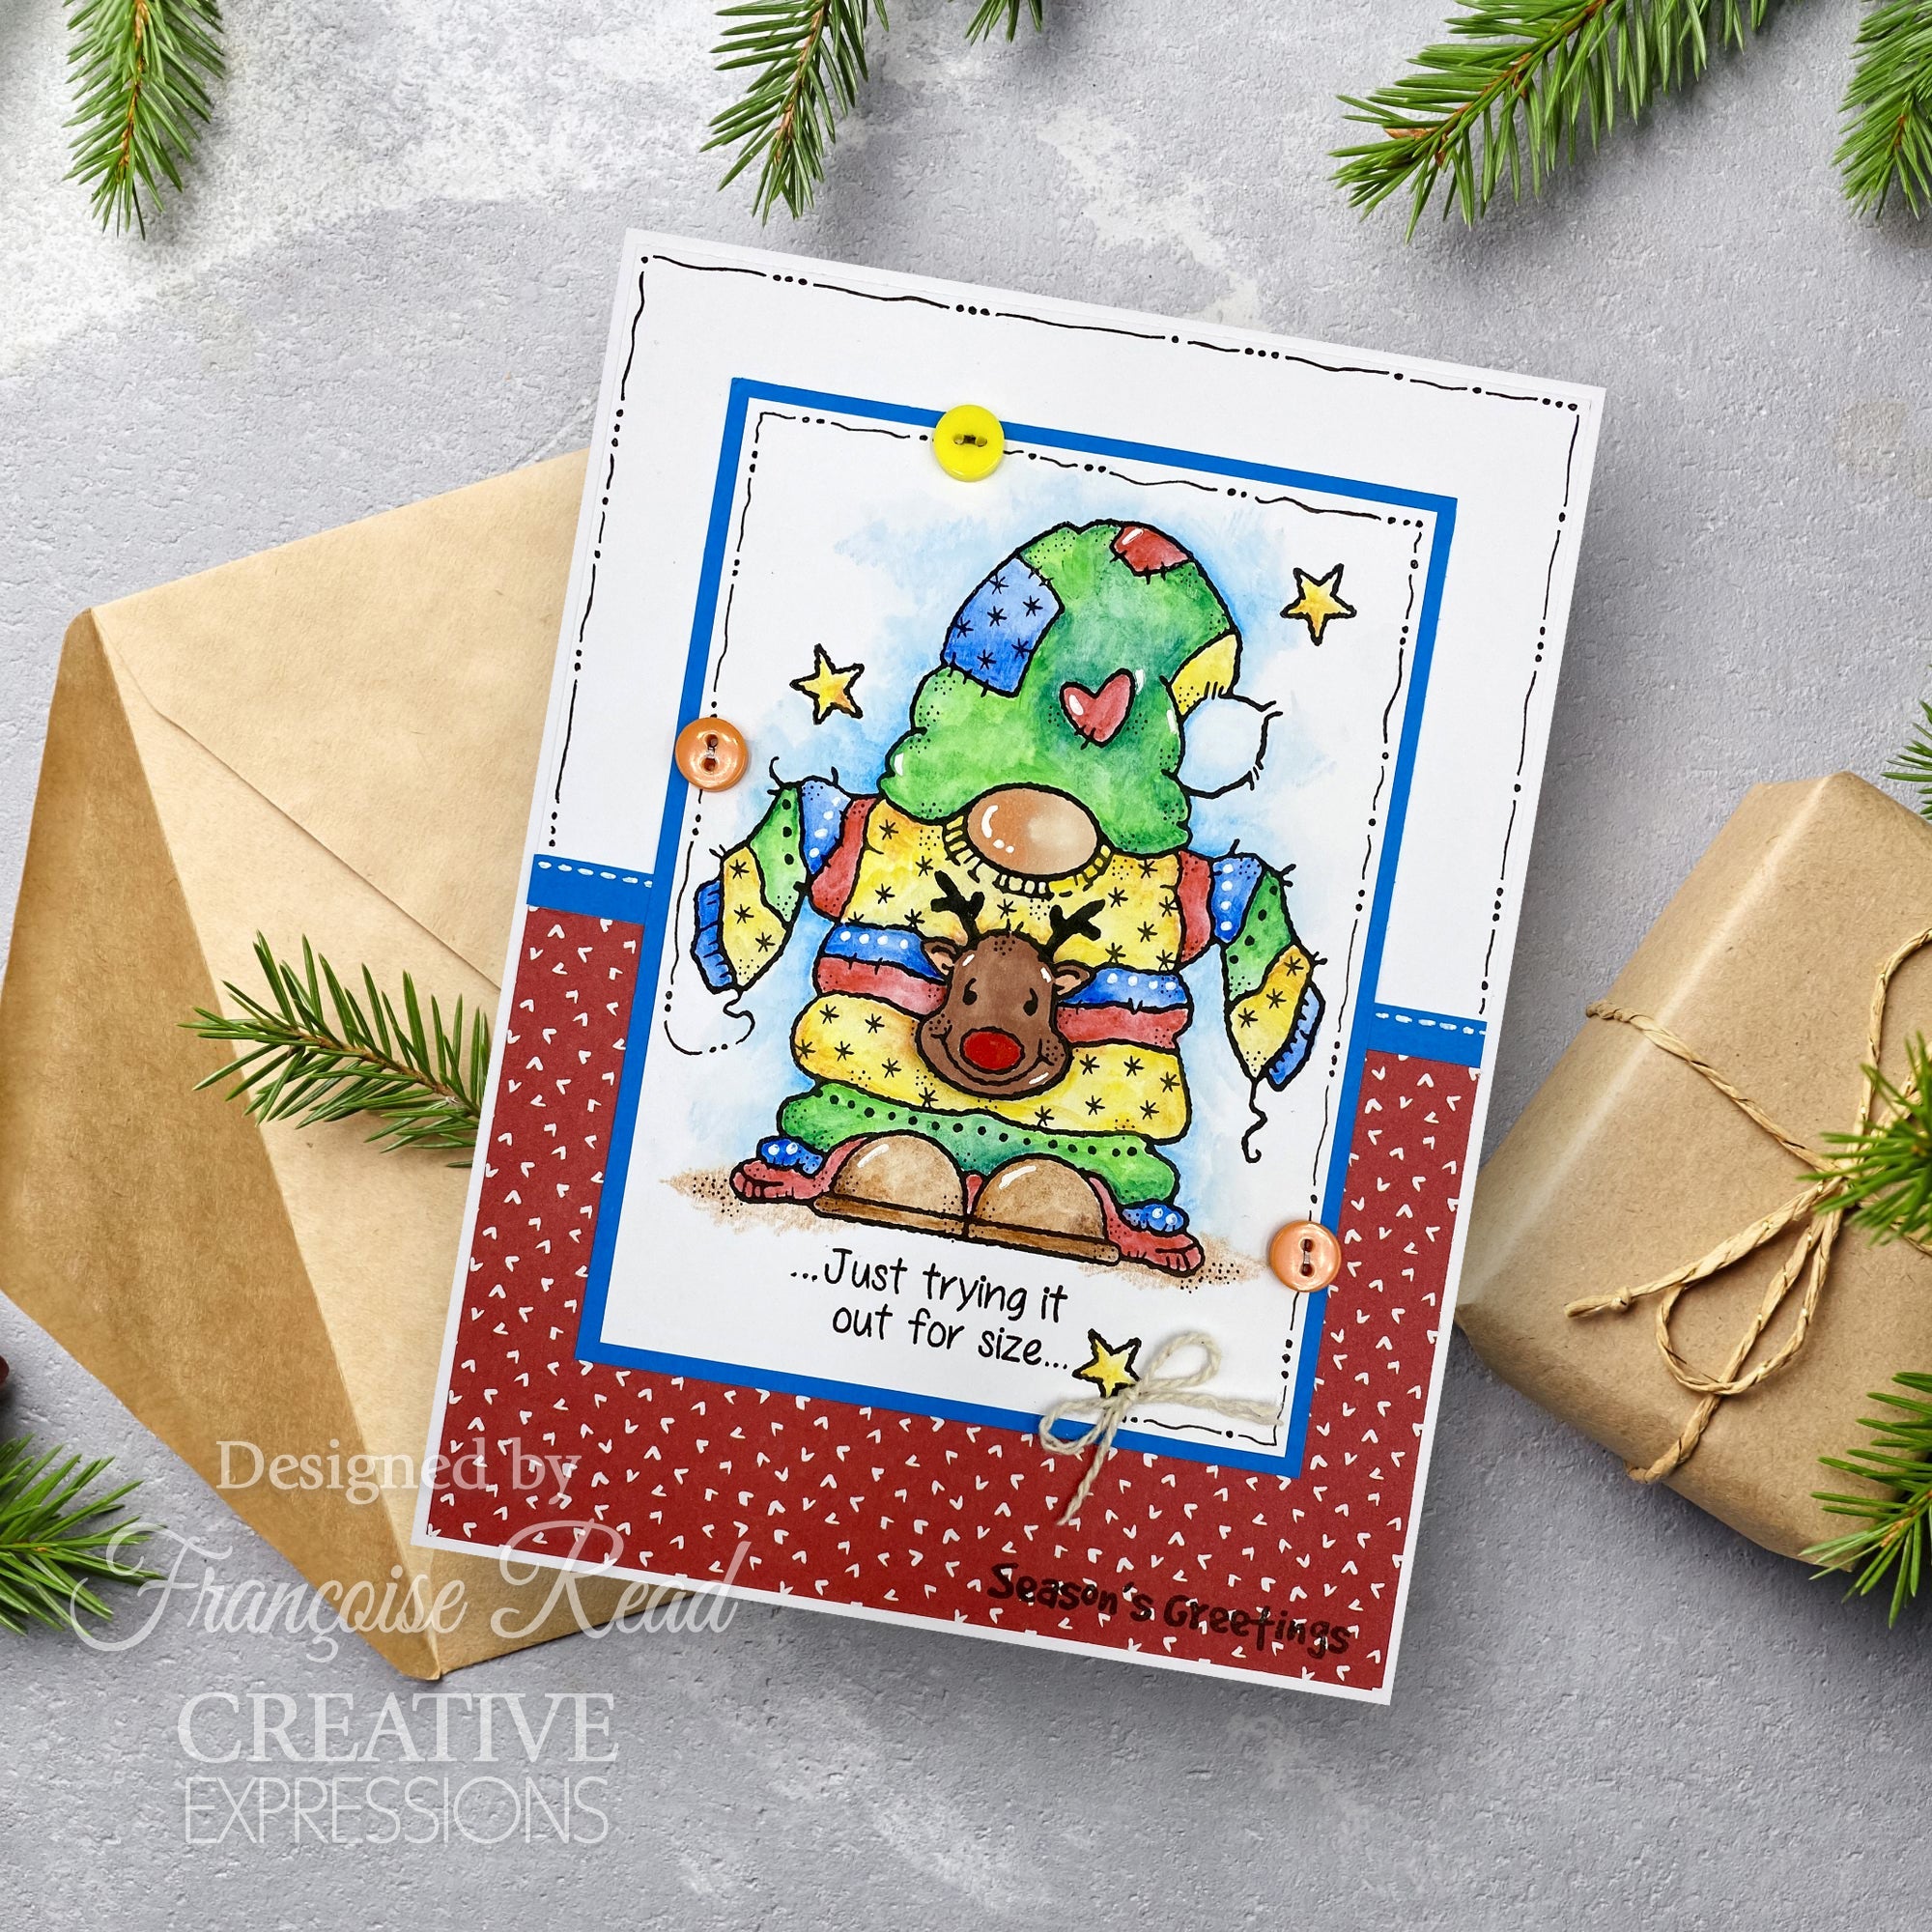 Woodware Clear Singles Cozy Gnome Jumper 4 in x 6 in Stamp Set